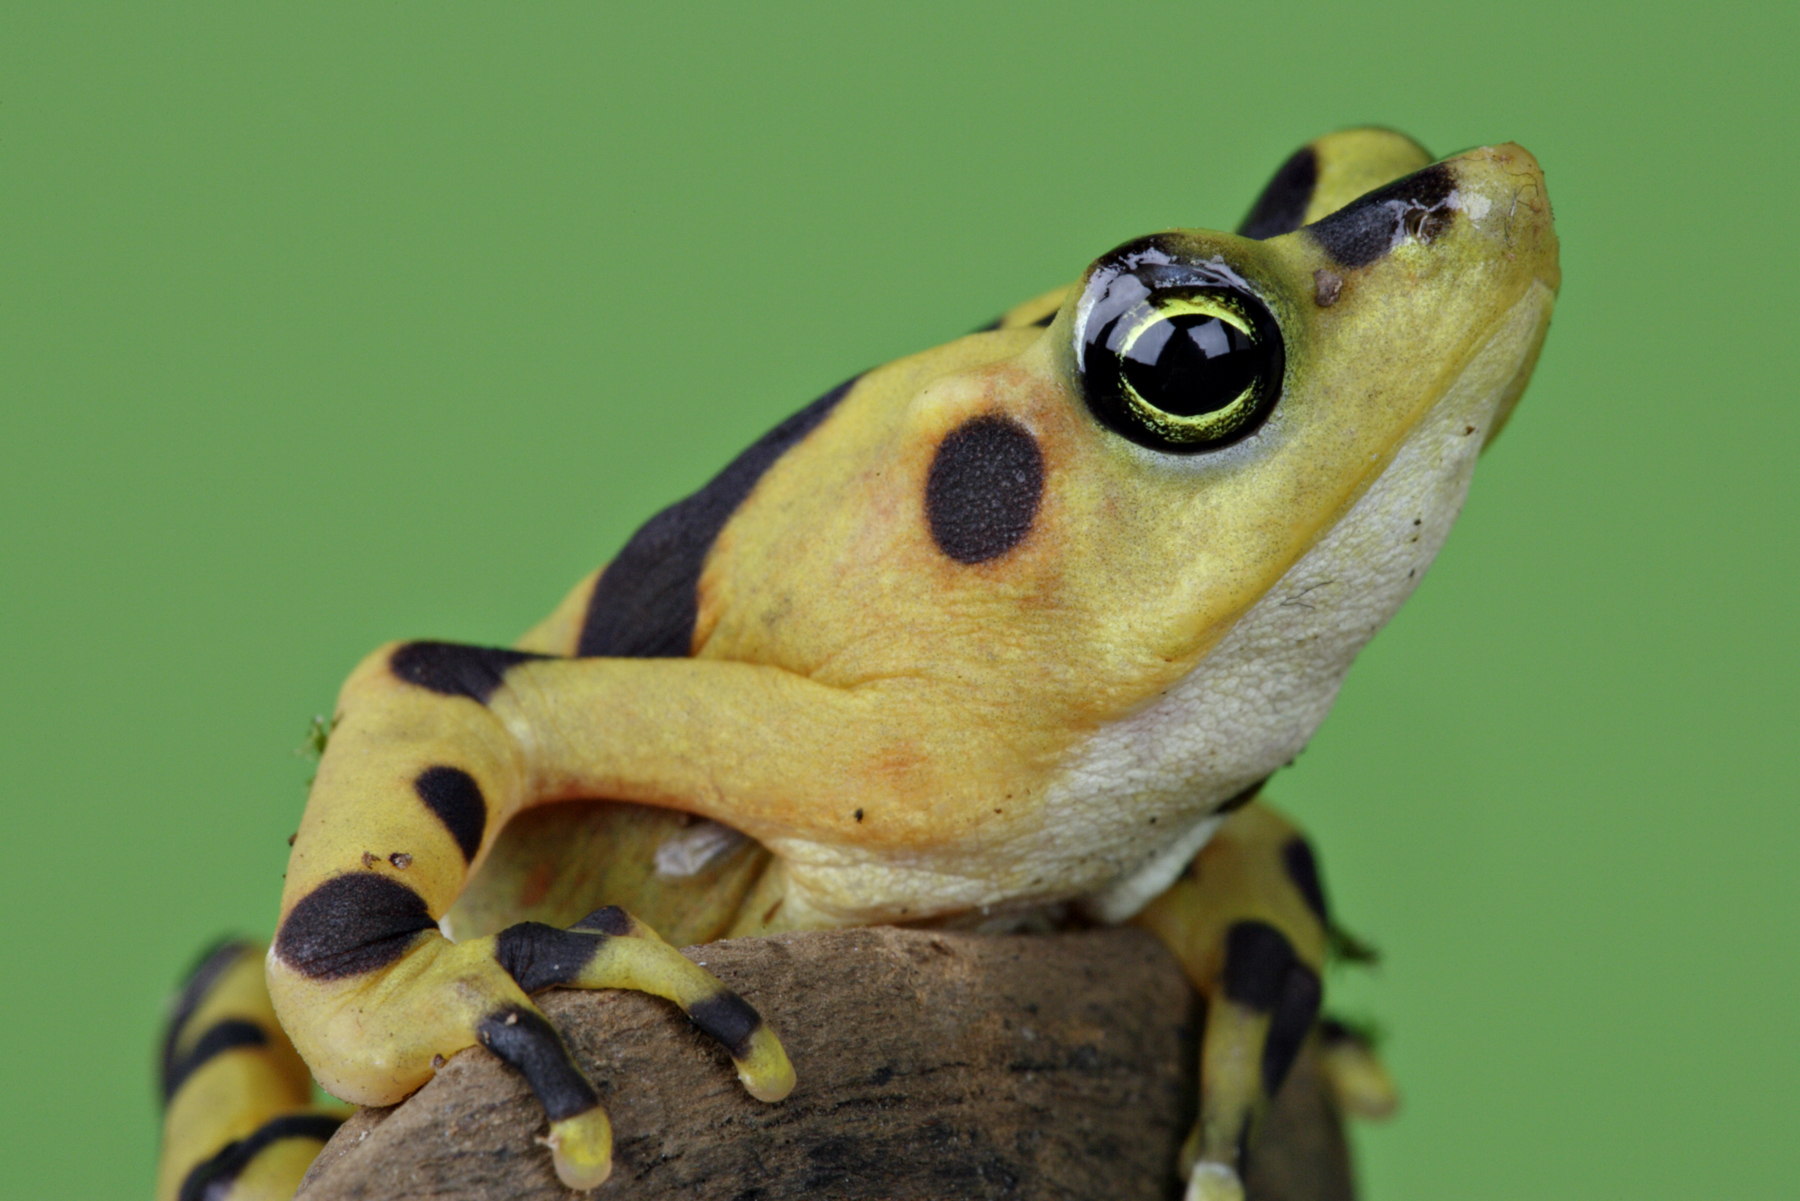 Panamanian golden frog | Amphibian Rescue and Conservation Project